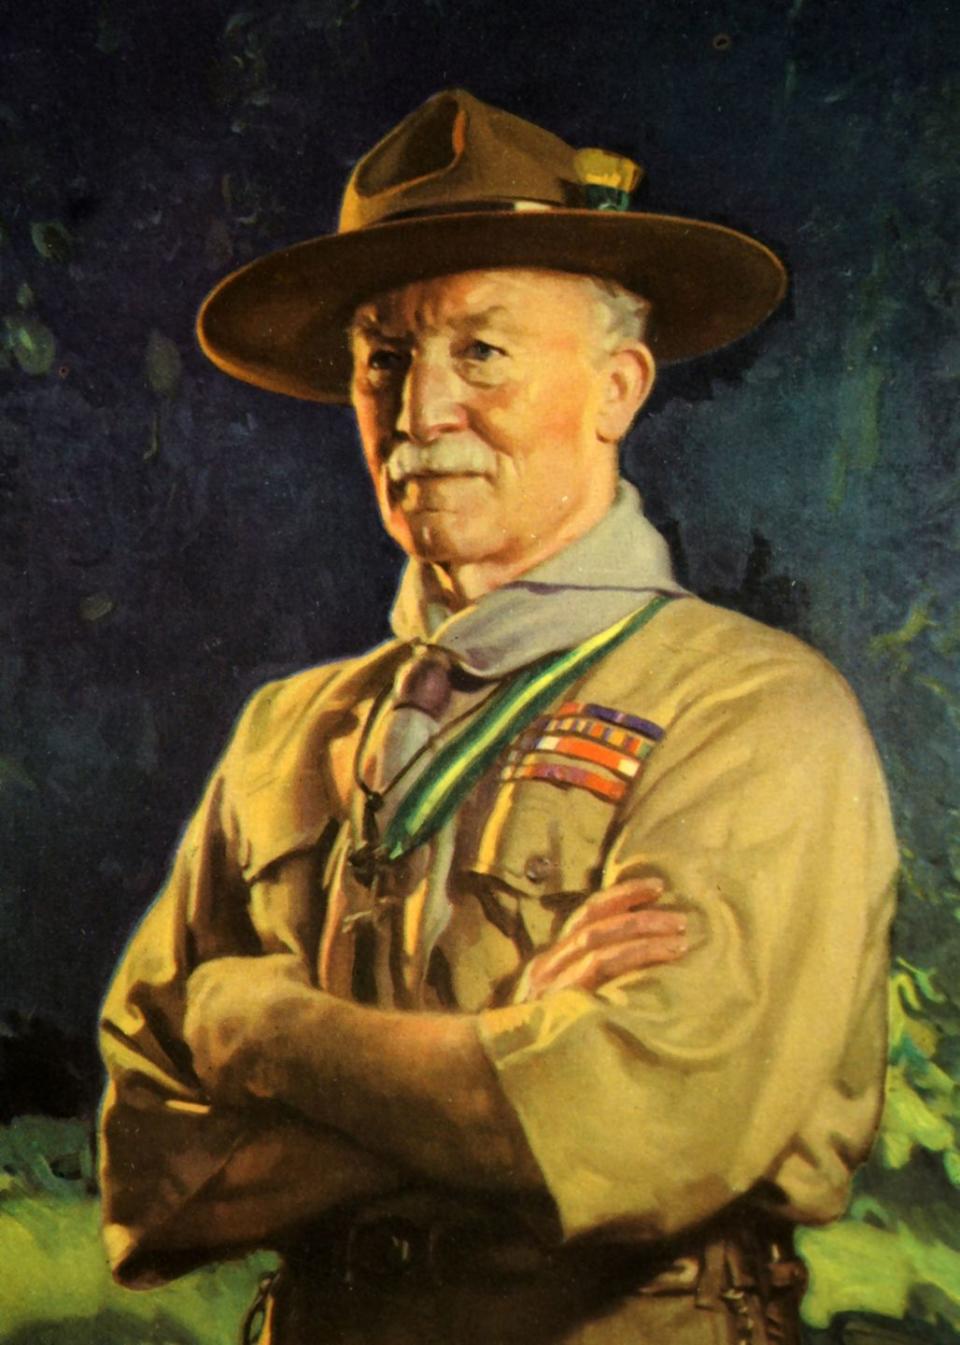 1) The First Boy Scout Was a British Baron